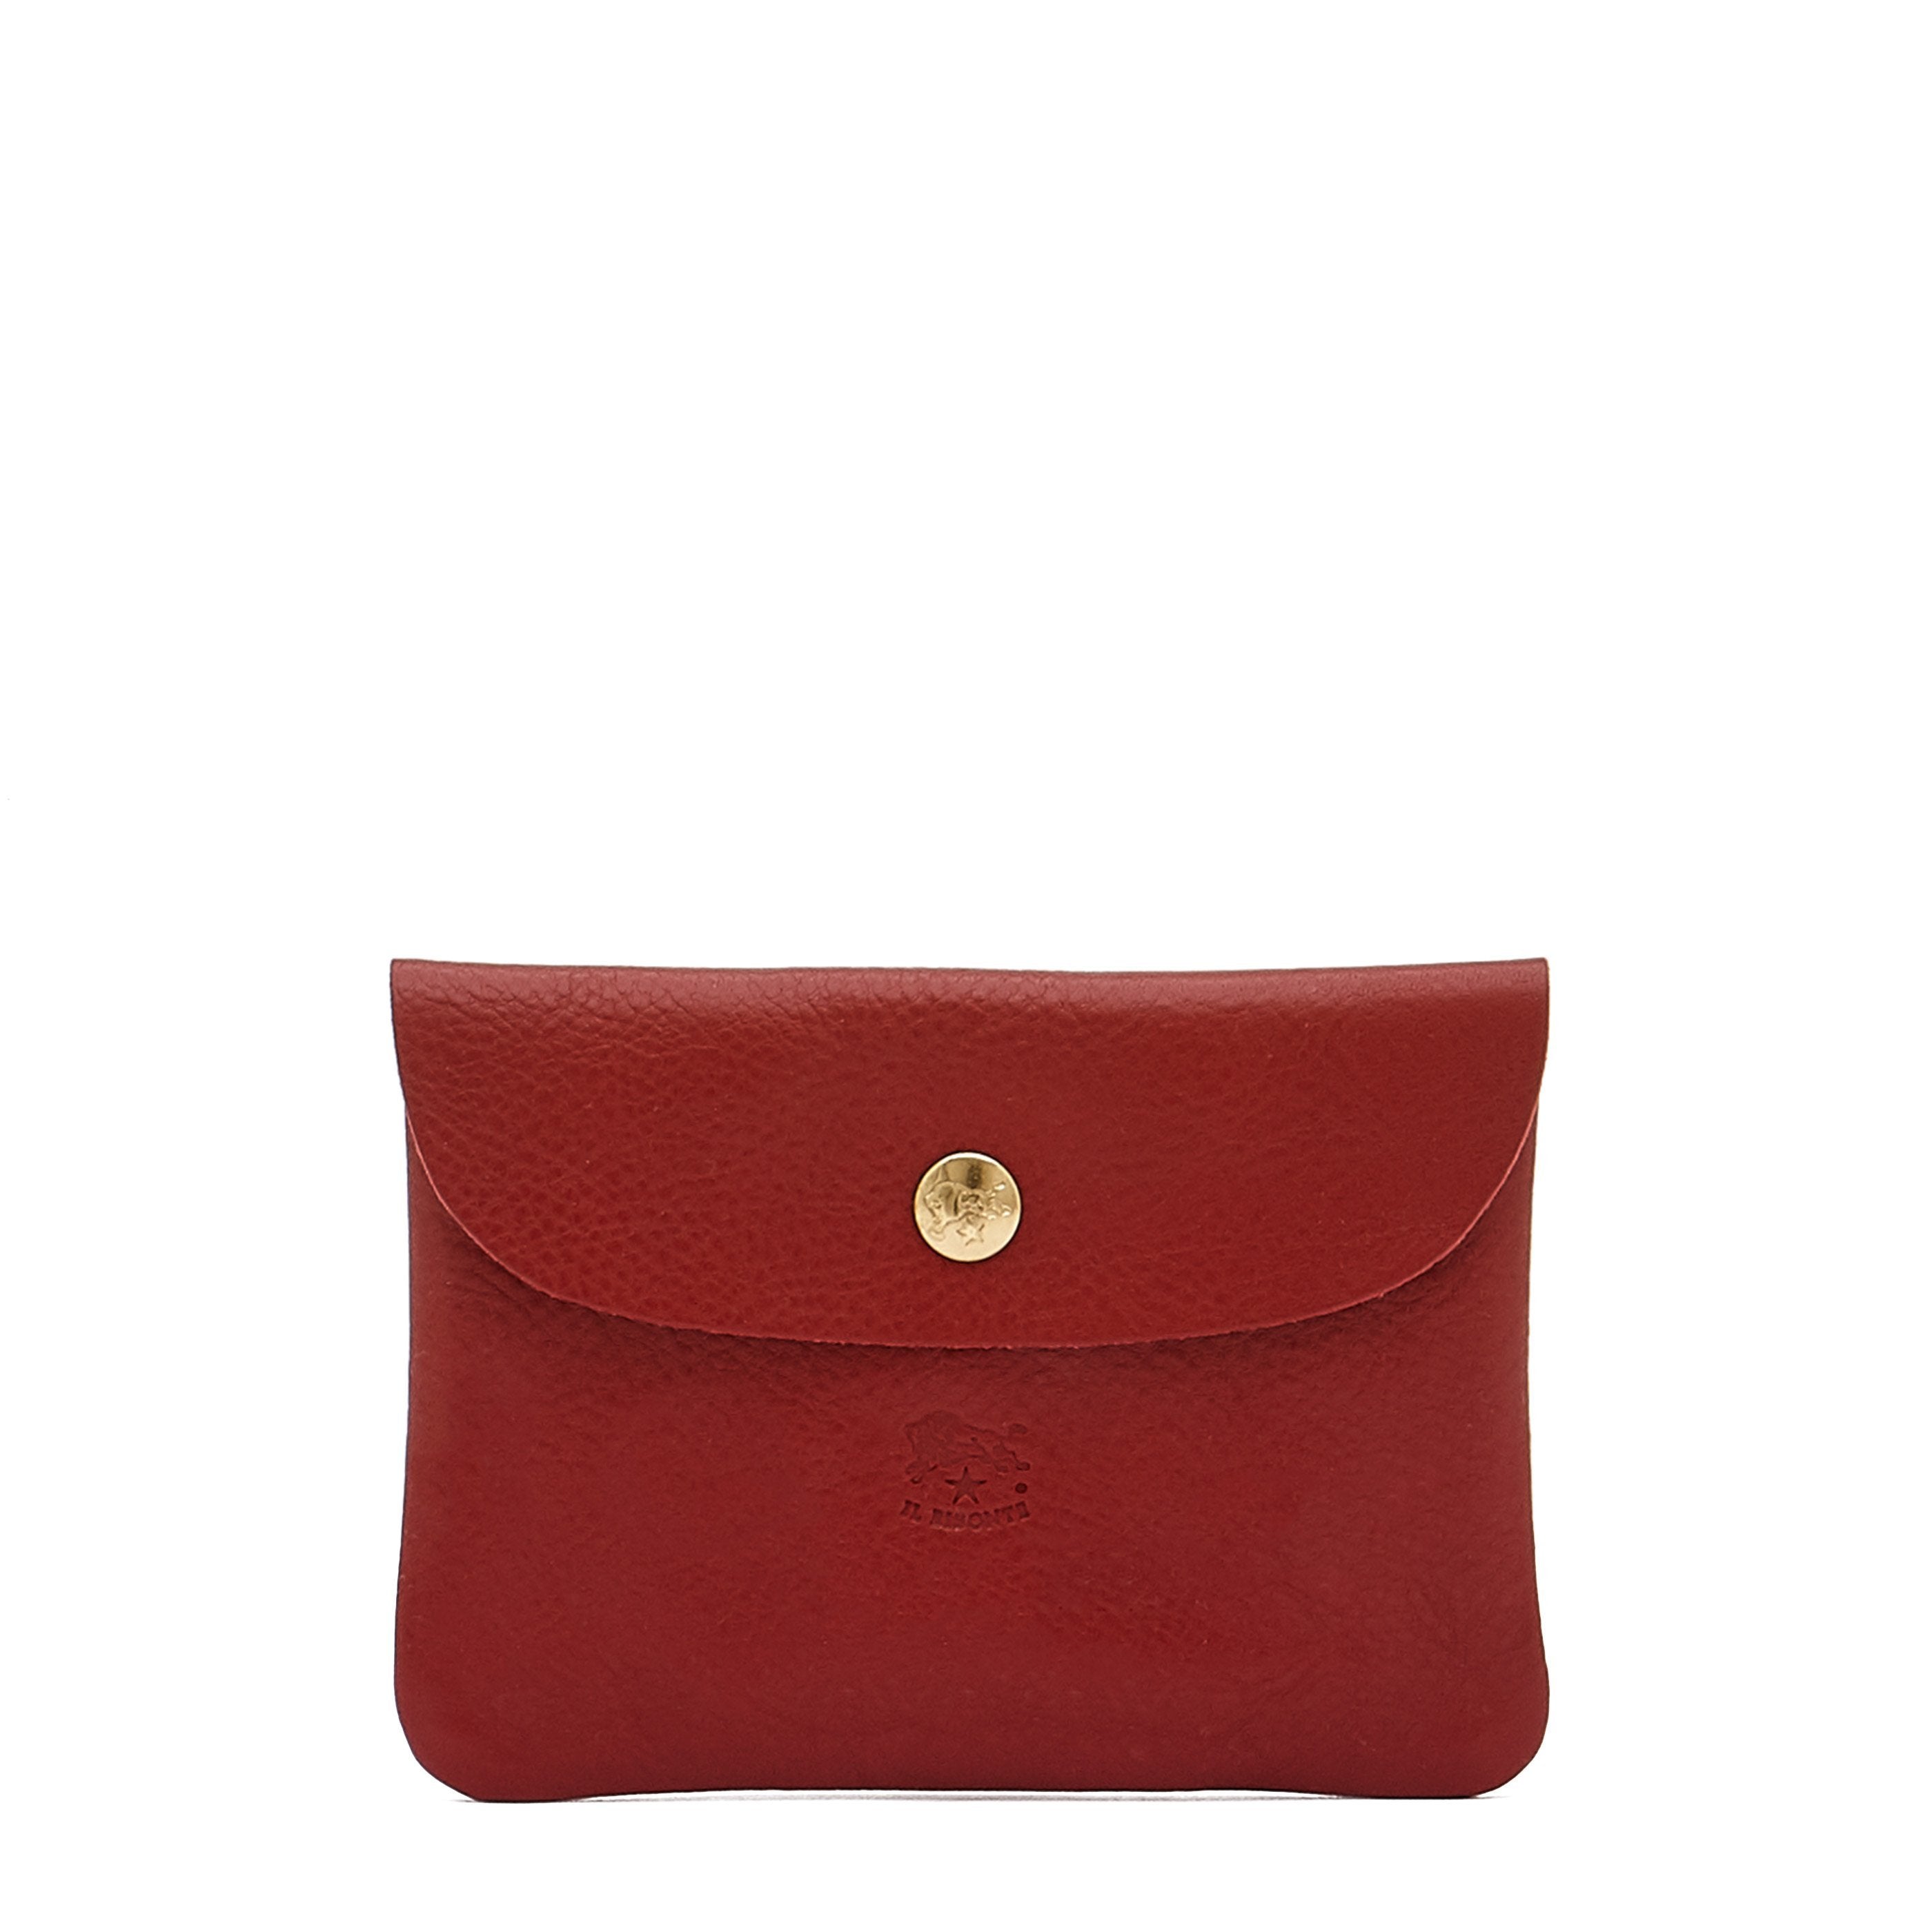 Case in leather color red